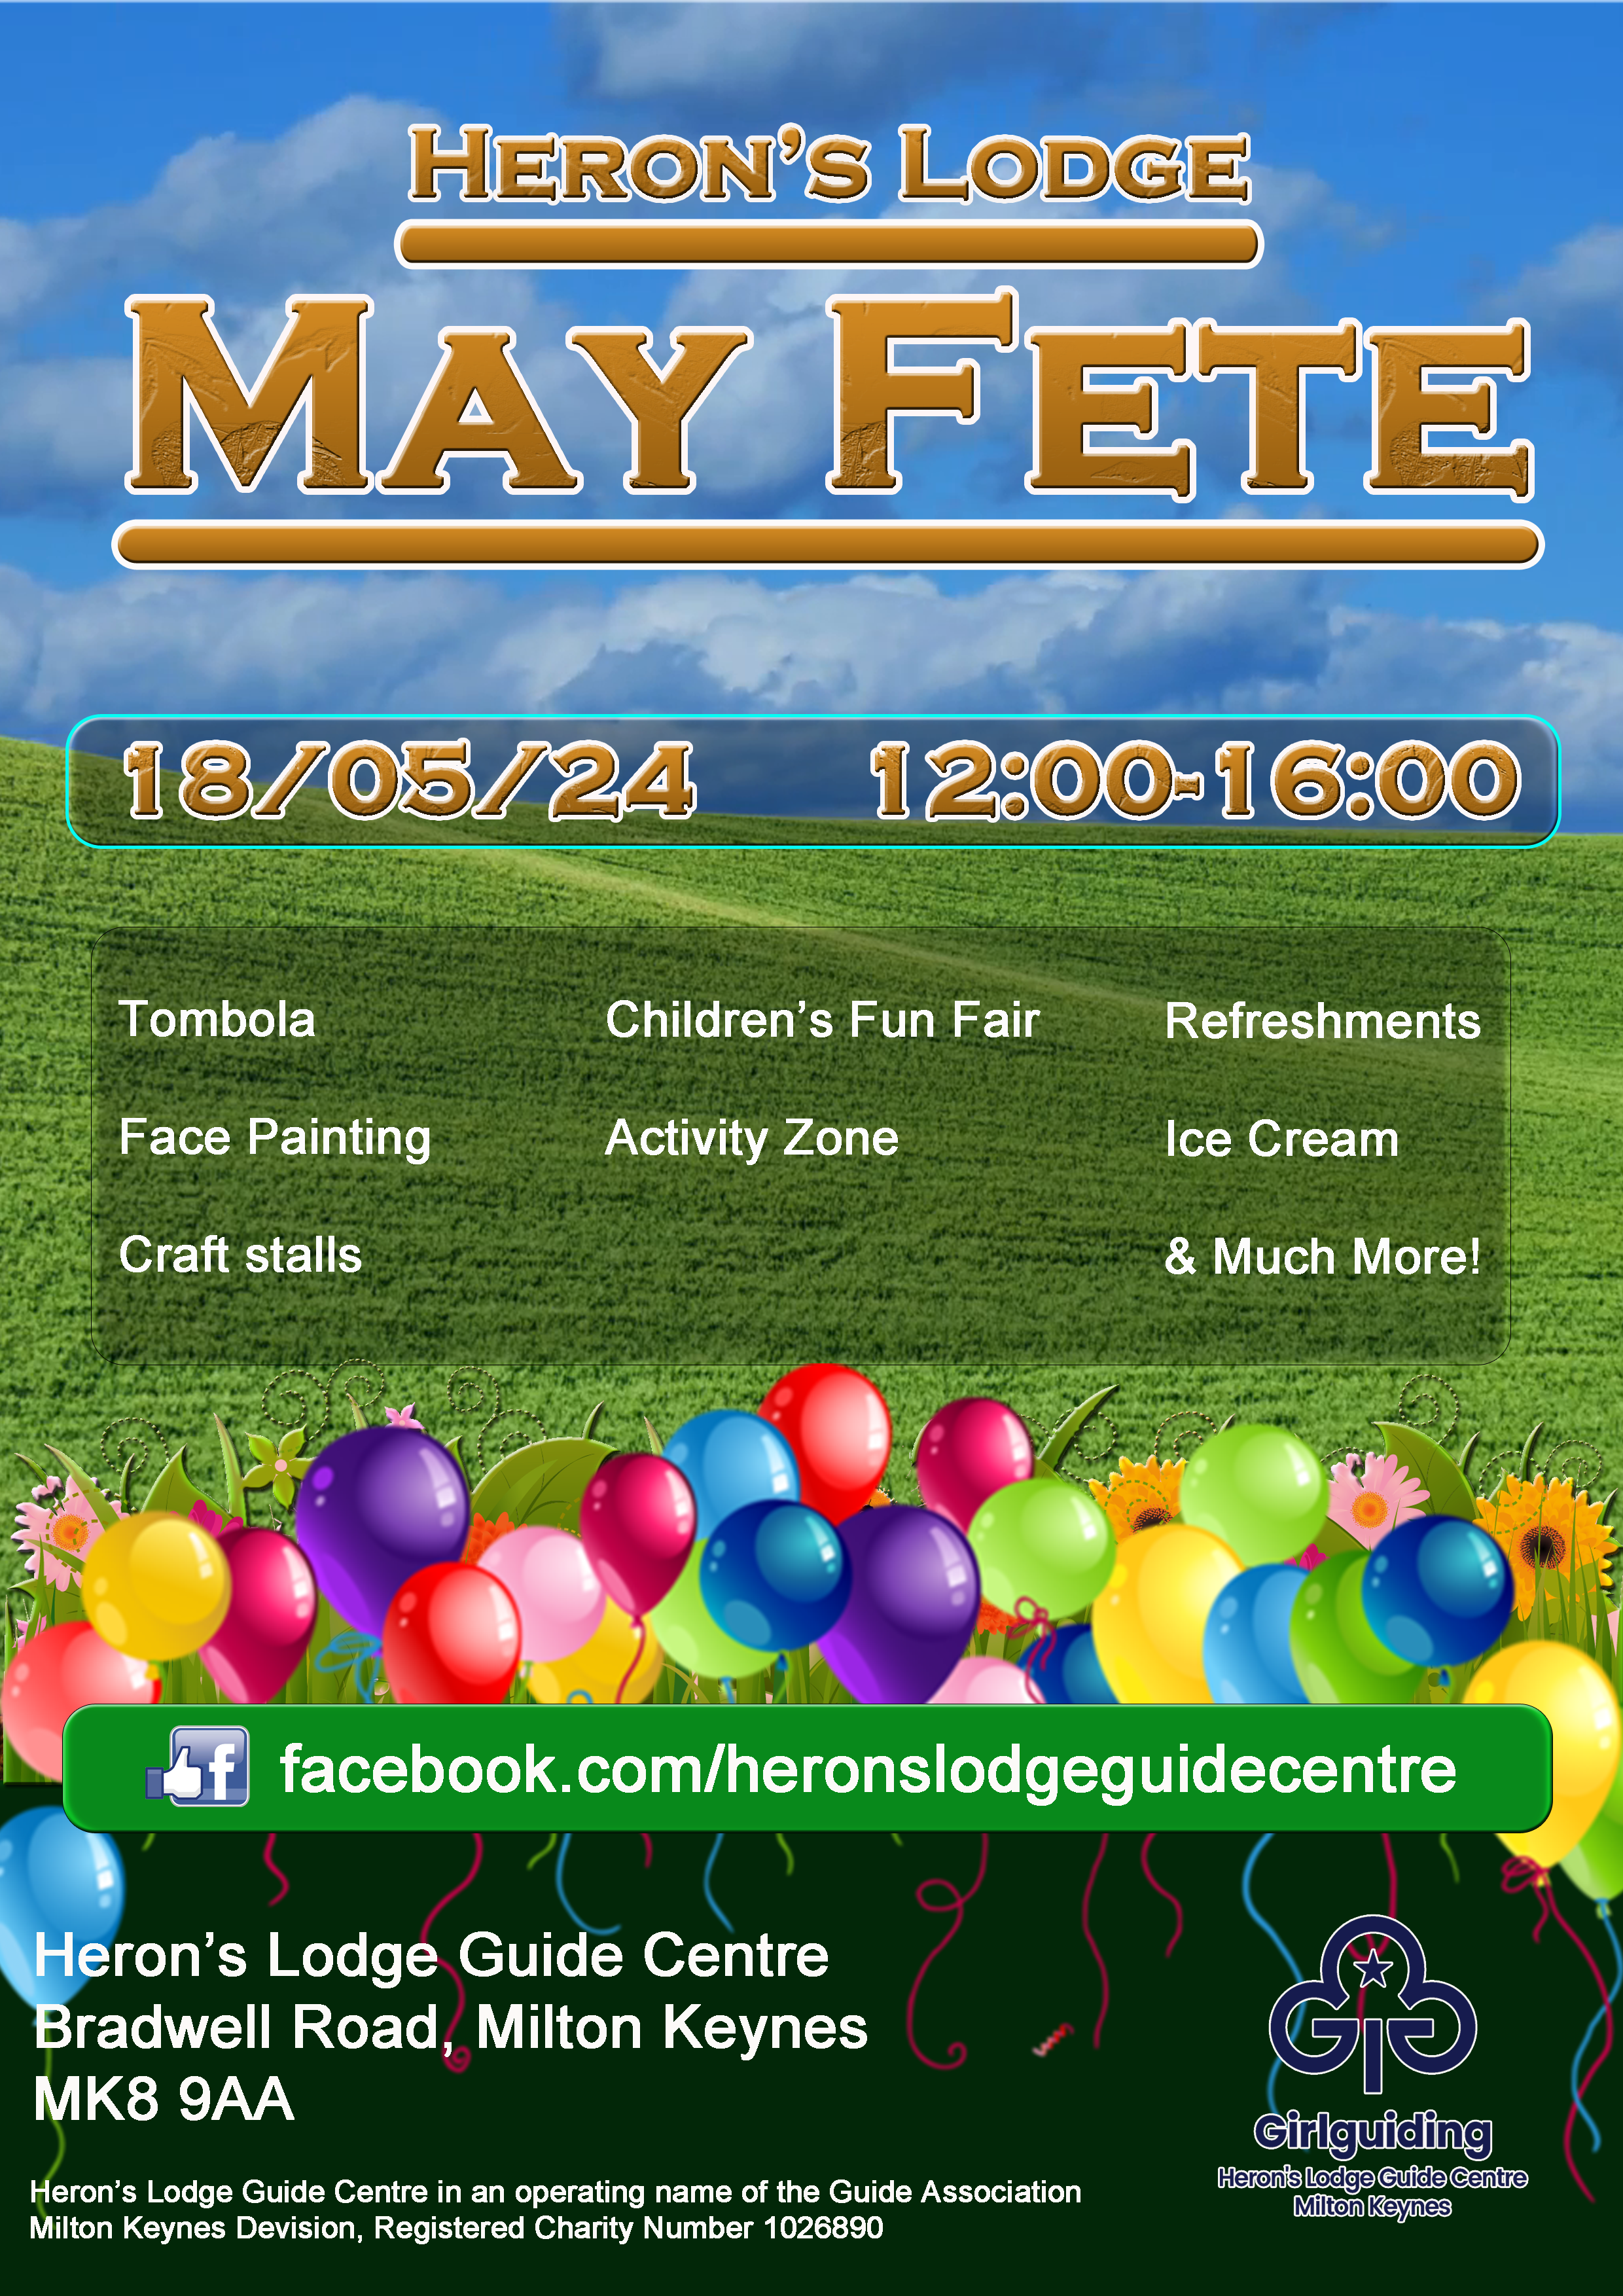 Heron’s Lodge Guide Centre – May Fete